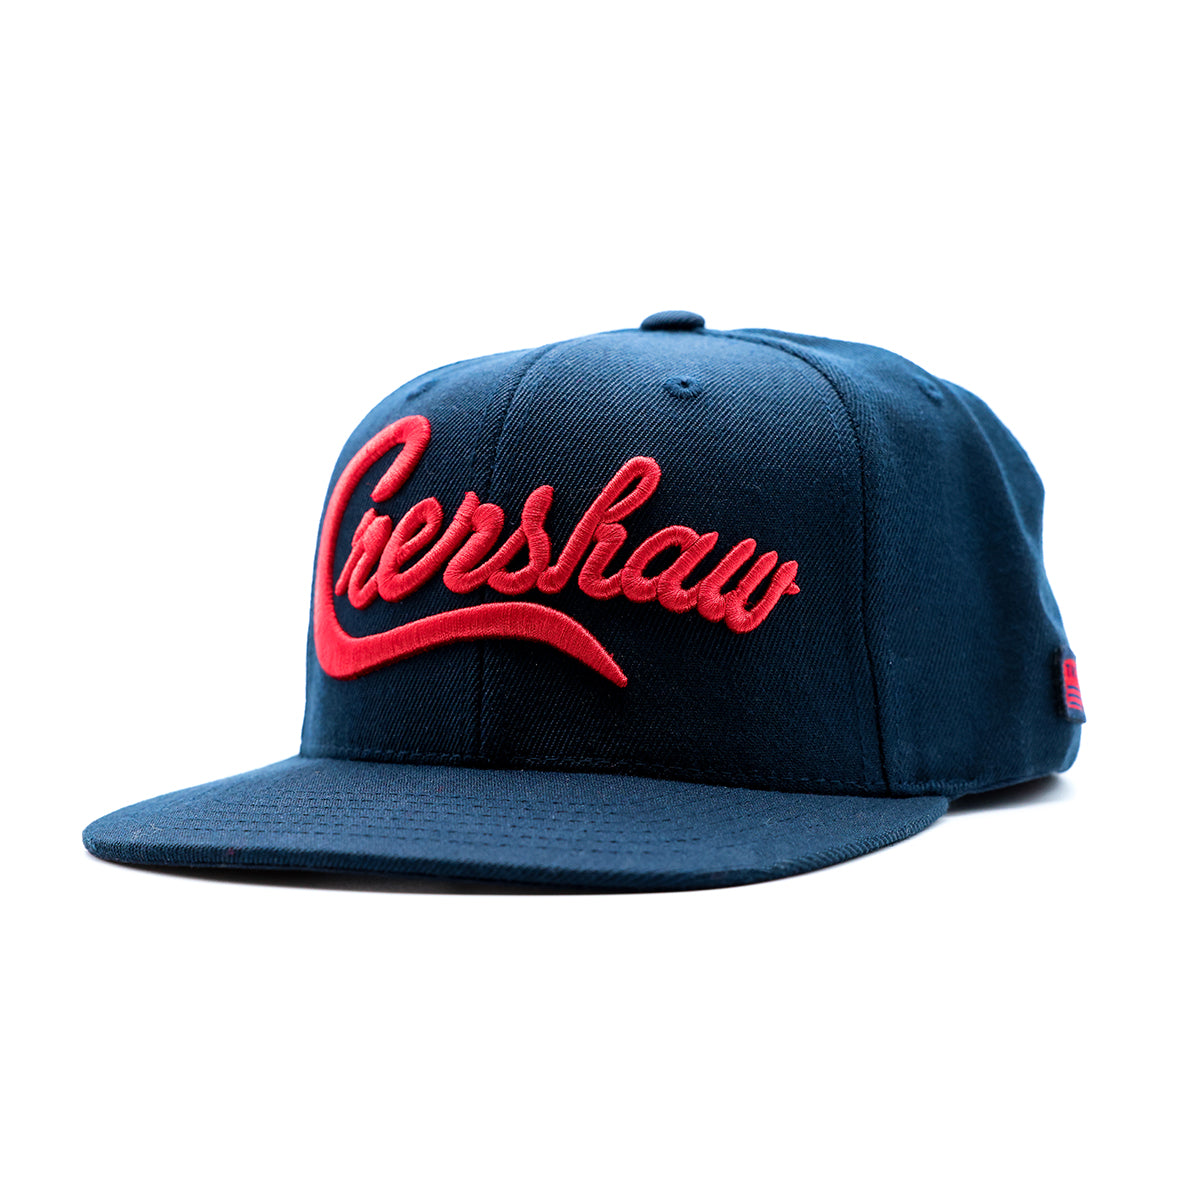 Crenshaw Limited Edition Snapback - Navy/Red - Angle